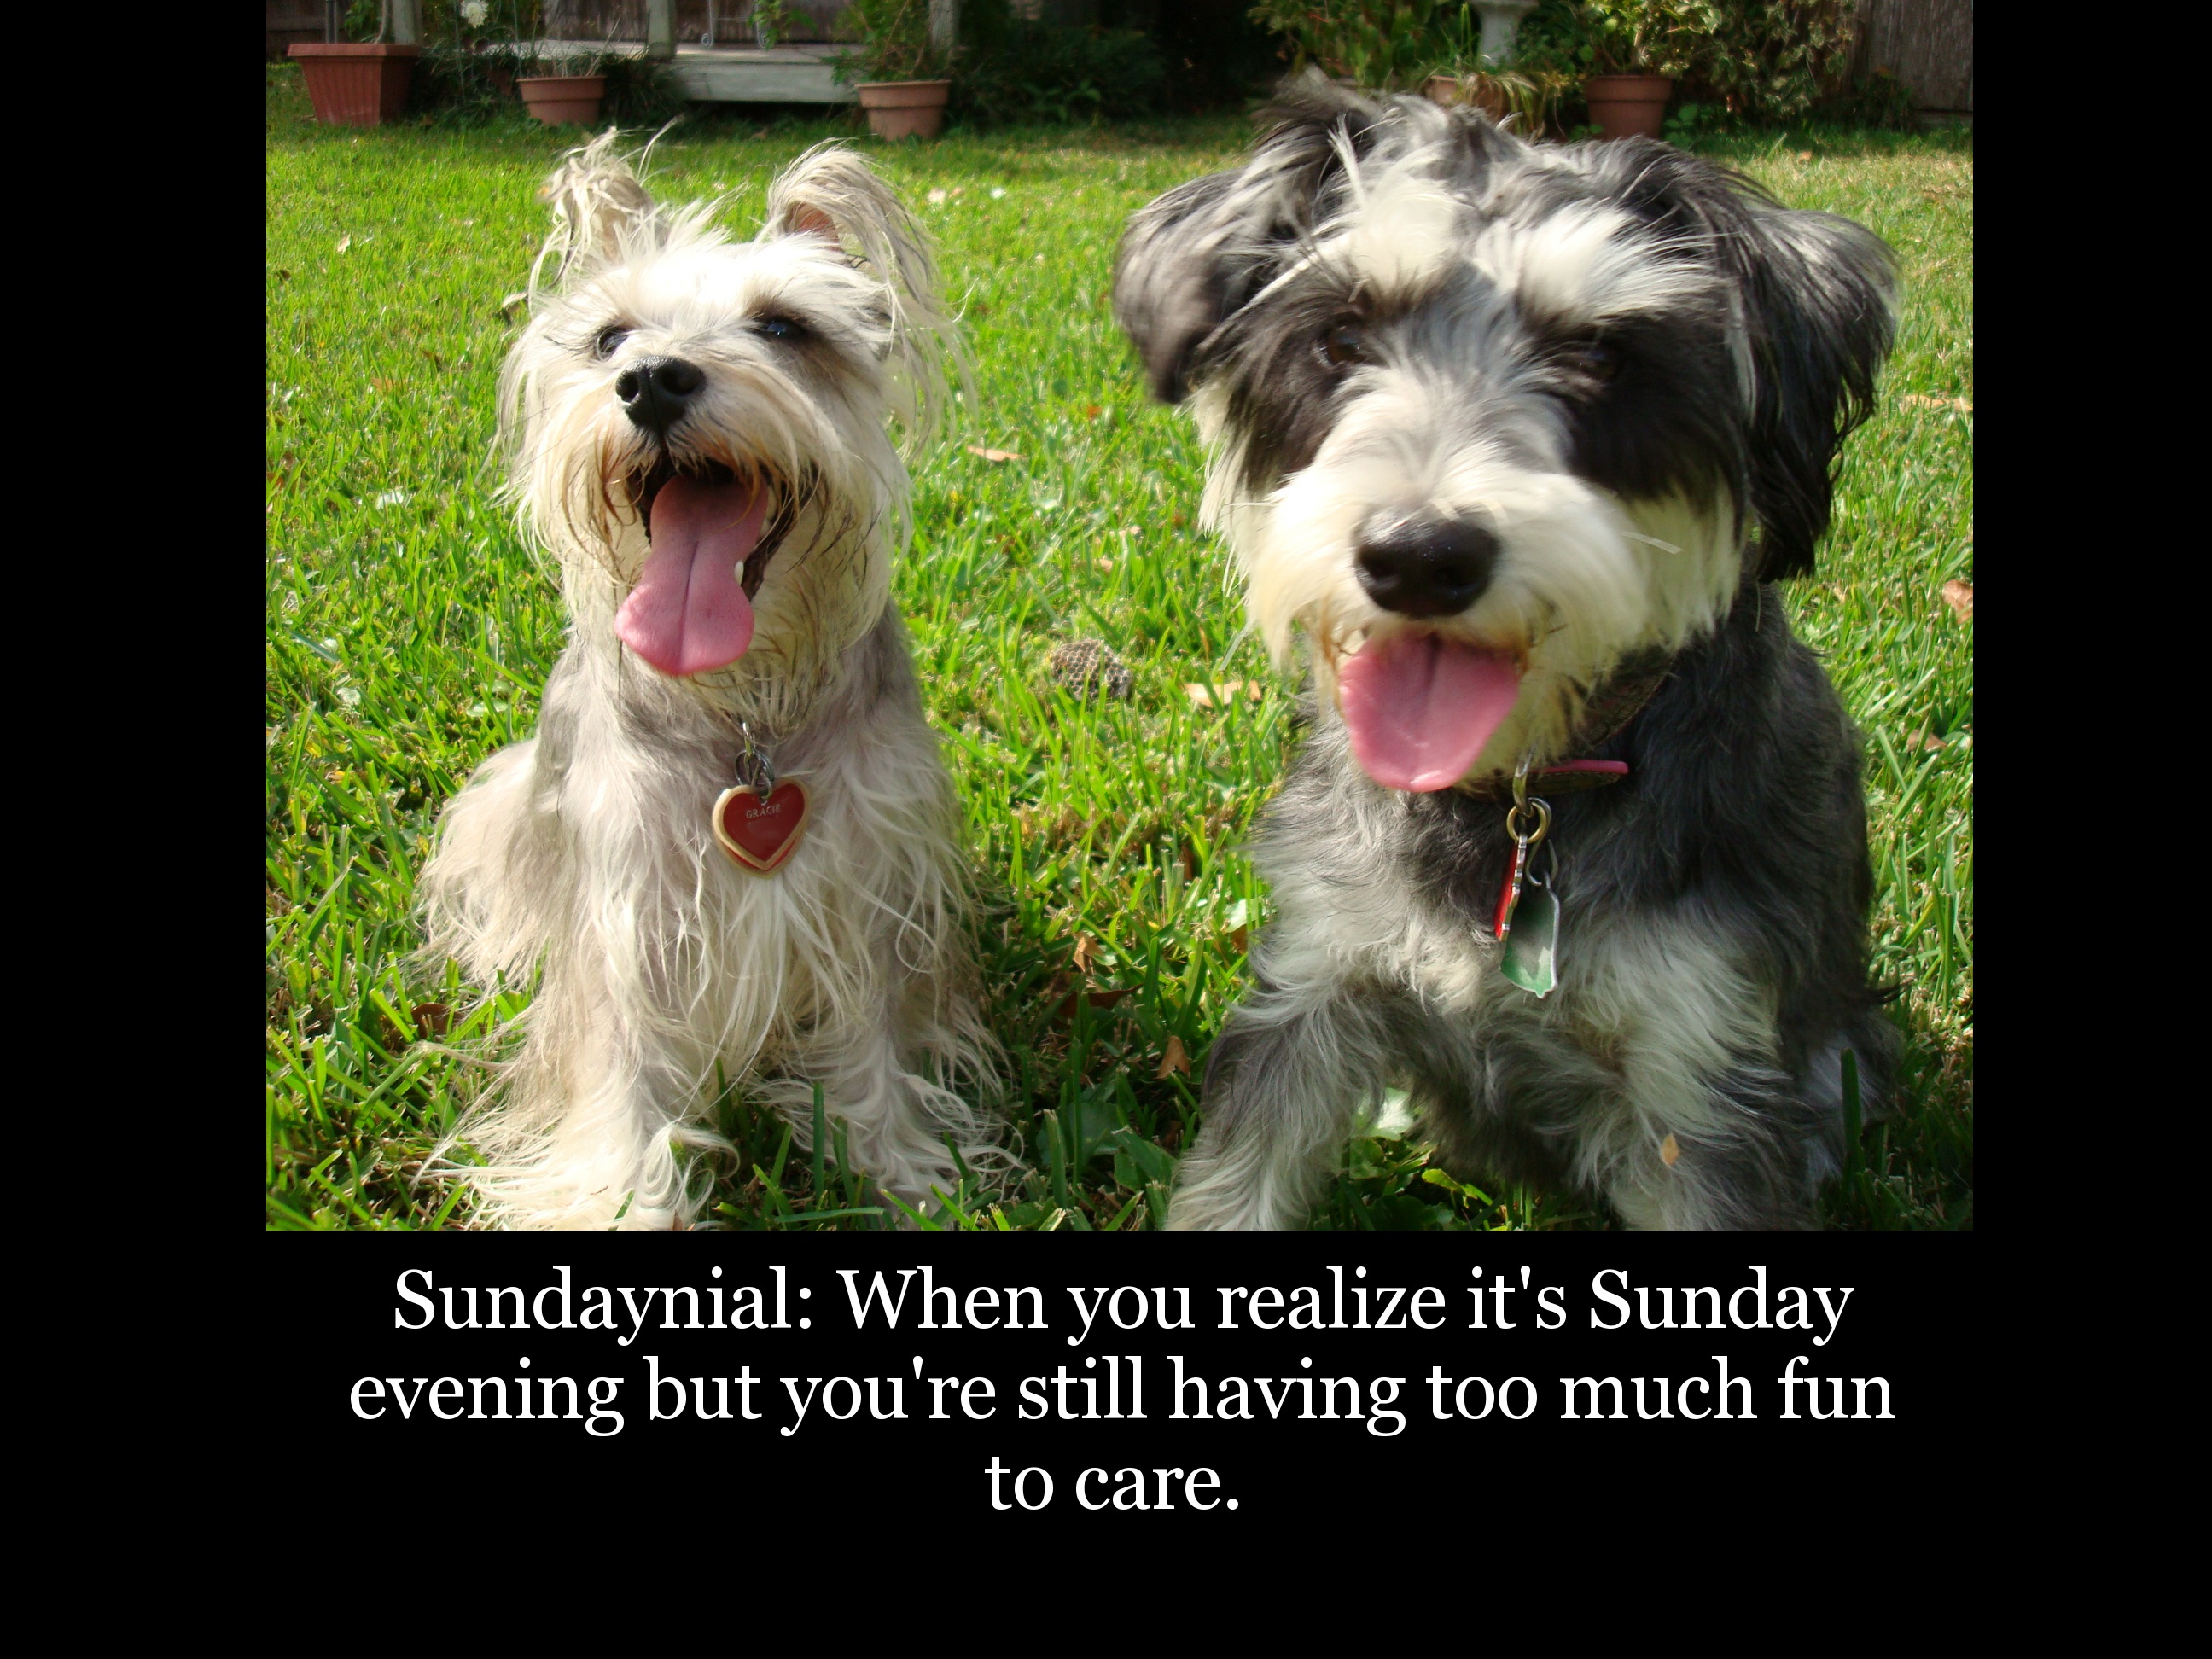 miniature schnauzer - Sundaynial When you realize it's Sunday evening but you're still having too much fun to care.